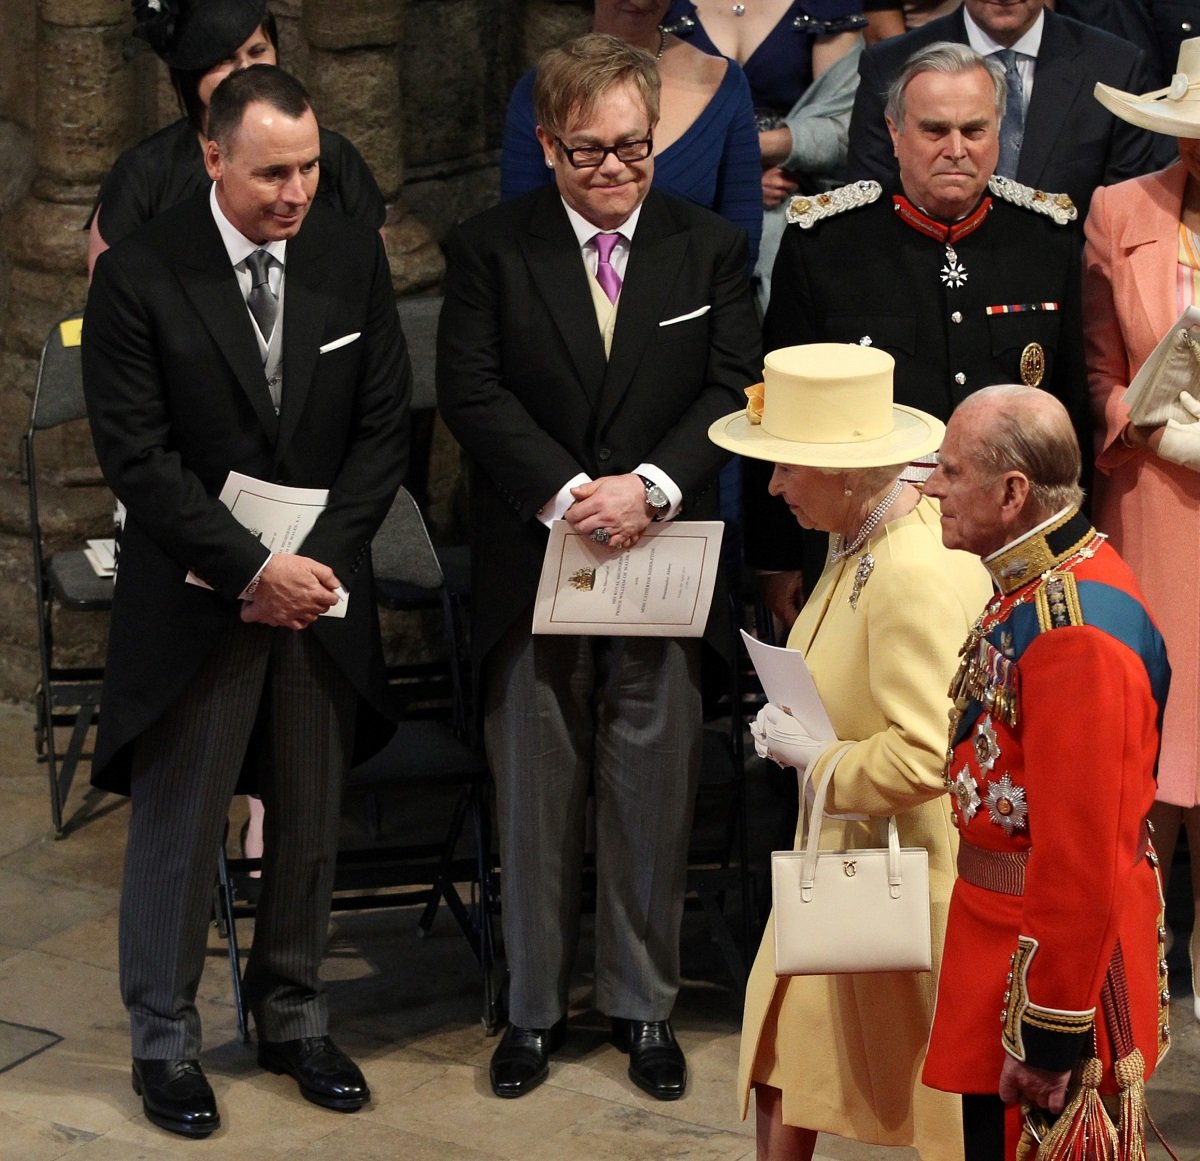 Queen Elizabeth II and Prince Philip walk past Elton John and David Furnish as they arrive for Prince William and Kate Middleton's wedding